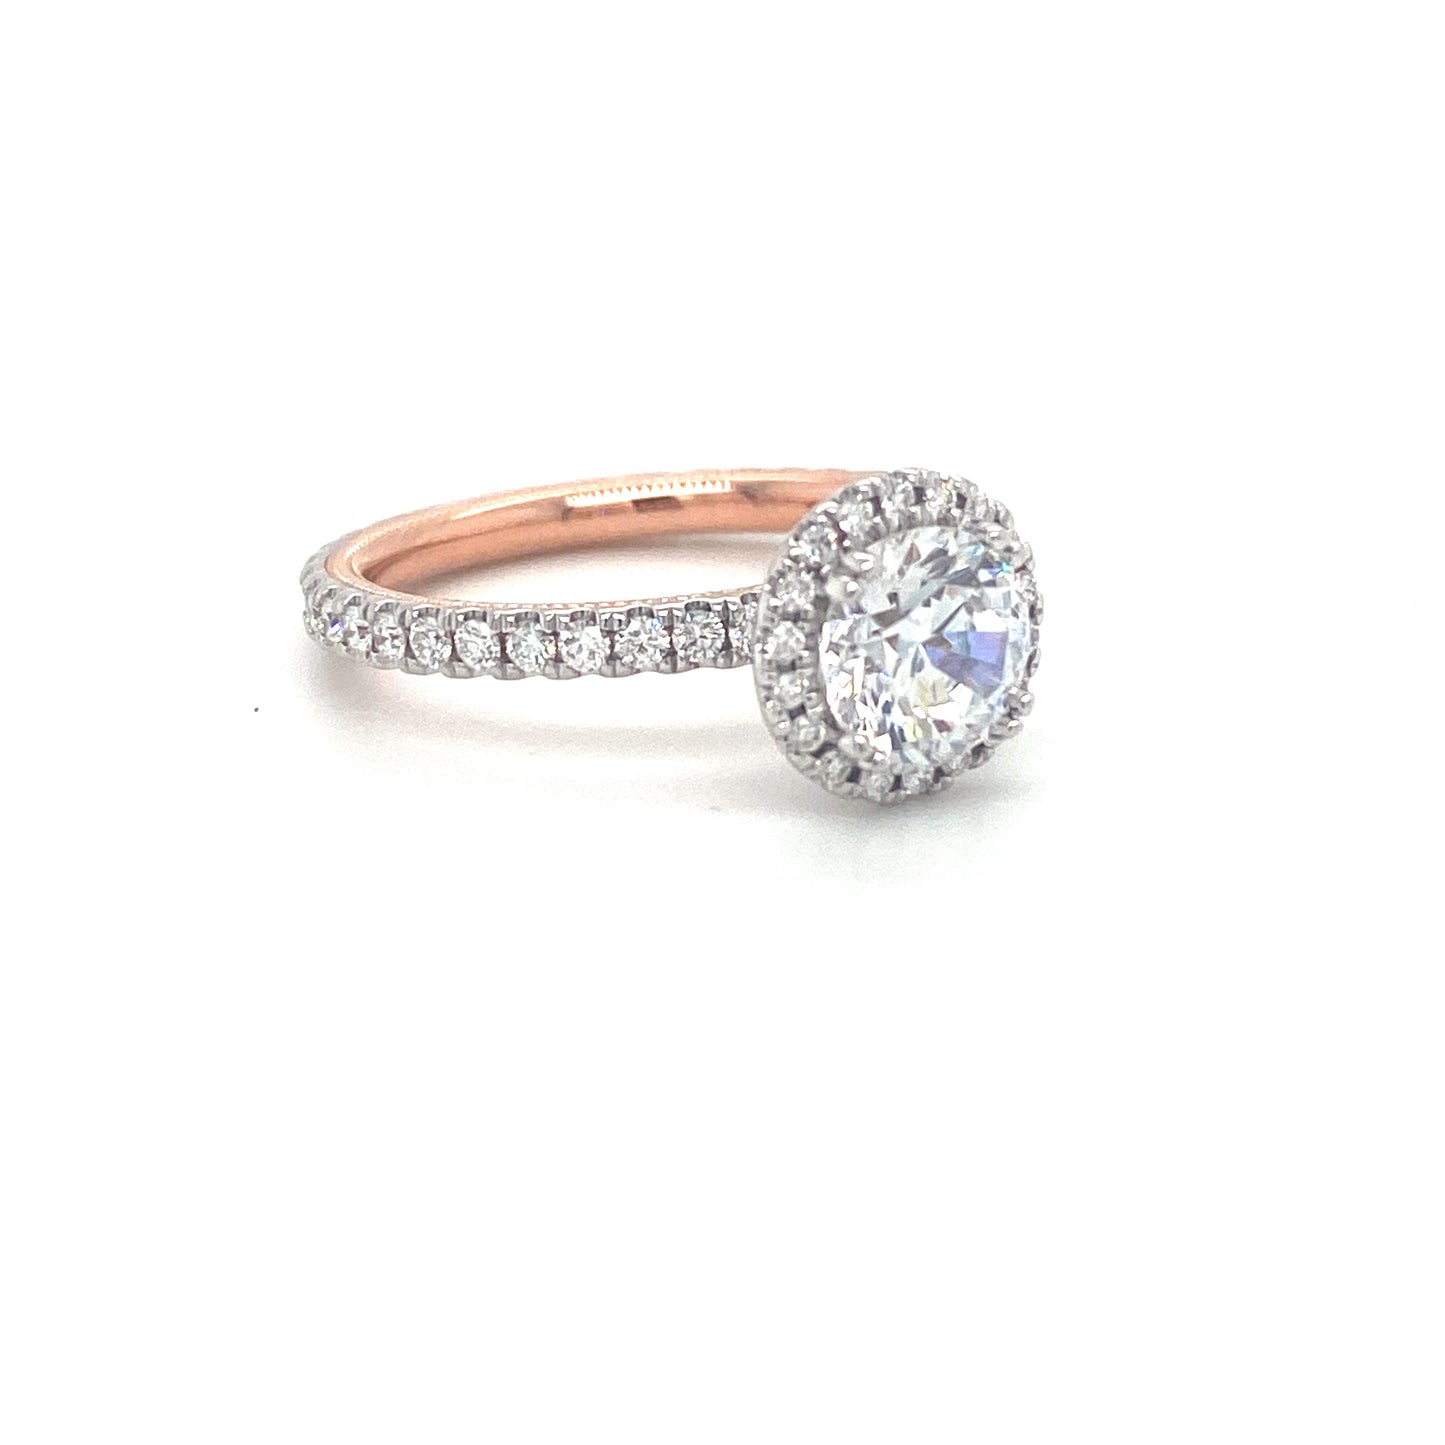 Verragio Tradition Collection White And Rose Gold Round Halo Semi-Mount Engagement Ring - Diamond Semi-Mount Rings